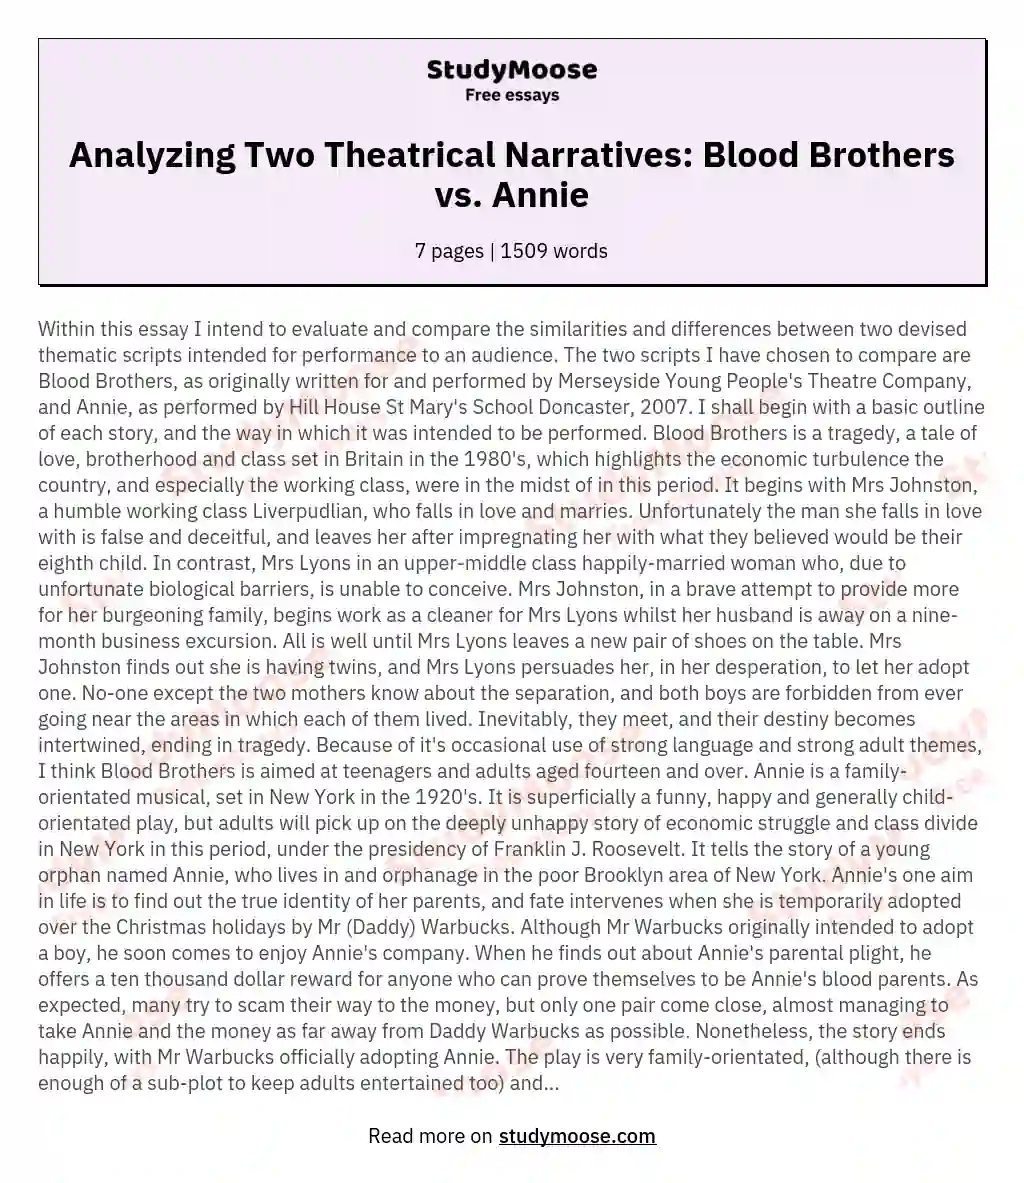 Analyzing Two Theatrical Narratives: Blood Brothers vs. Annie essay